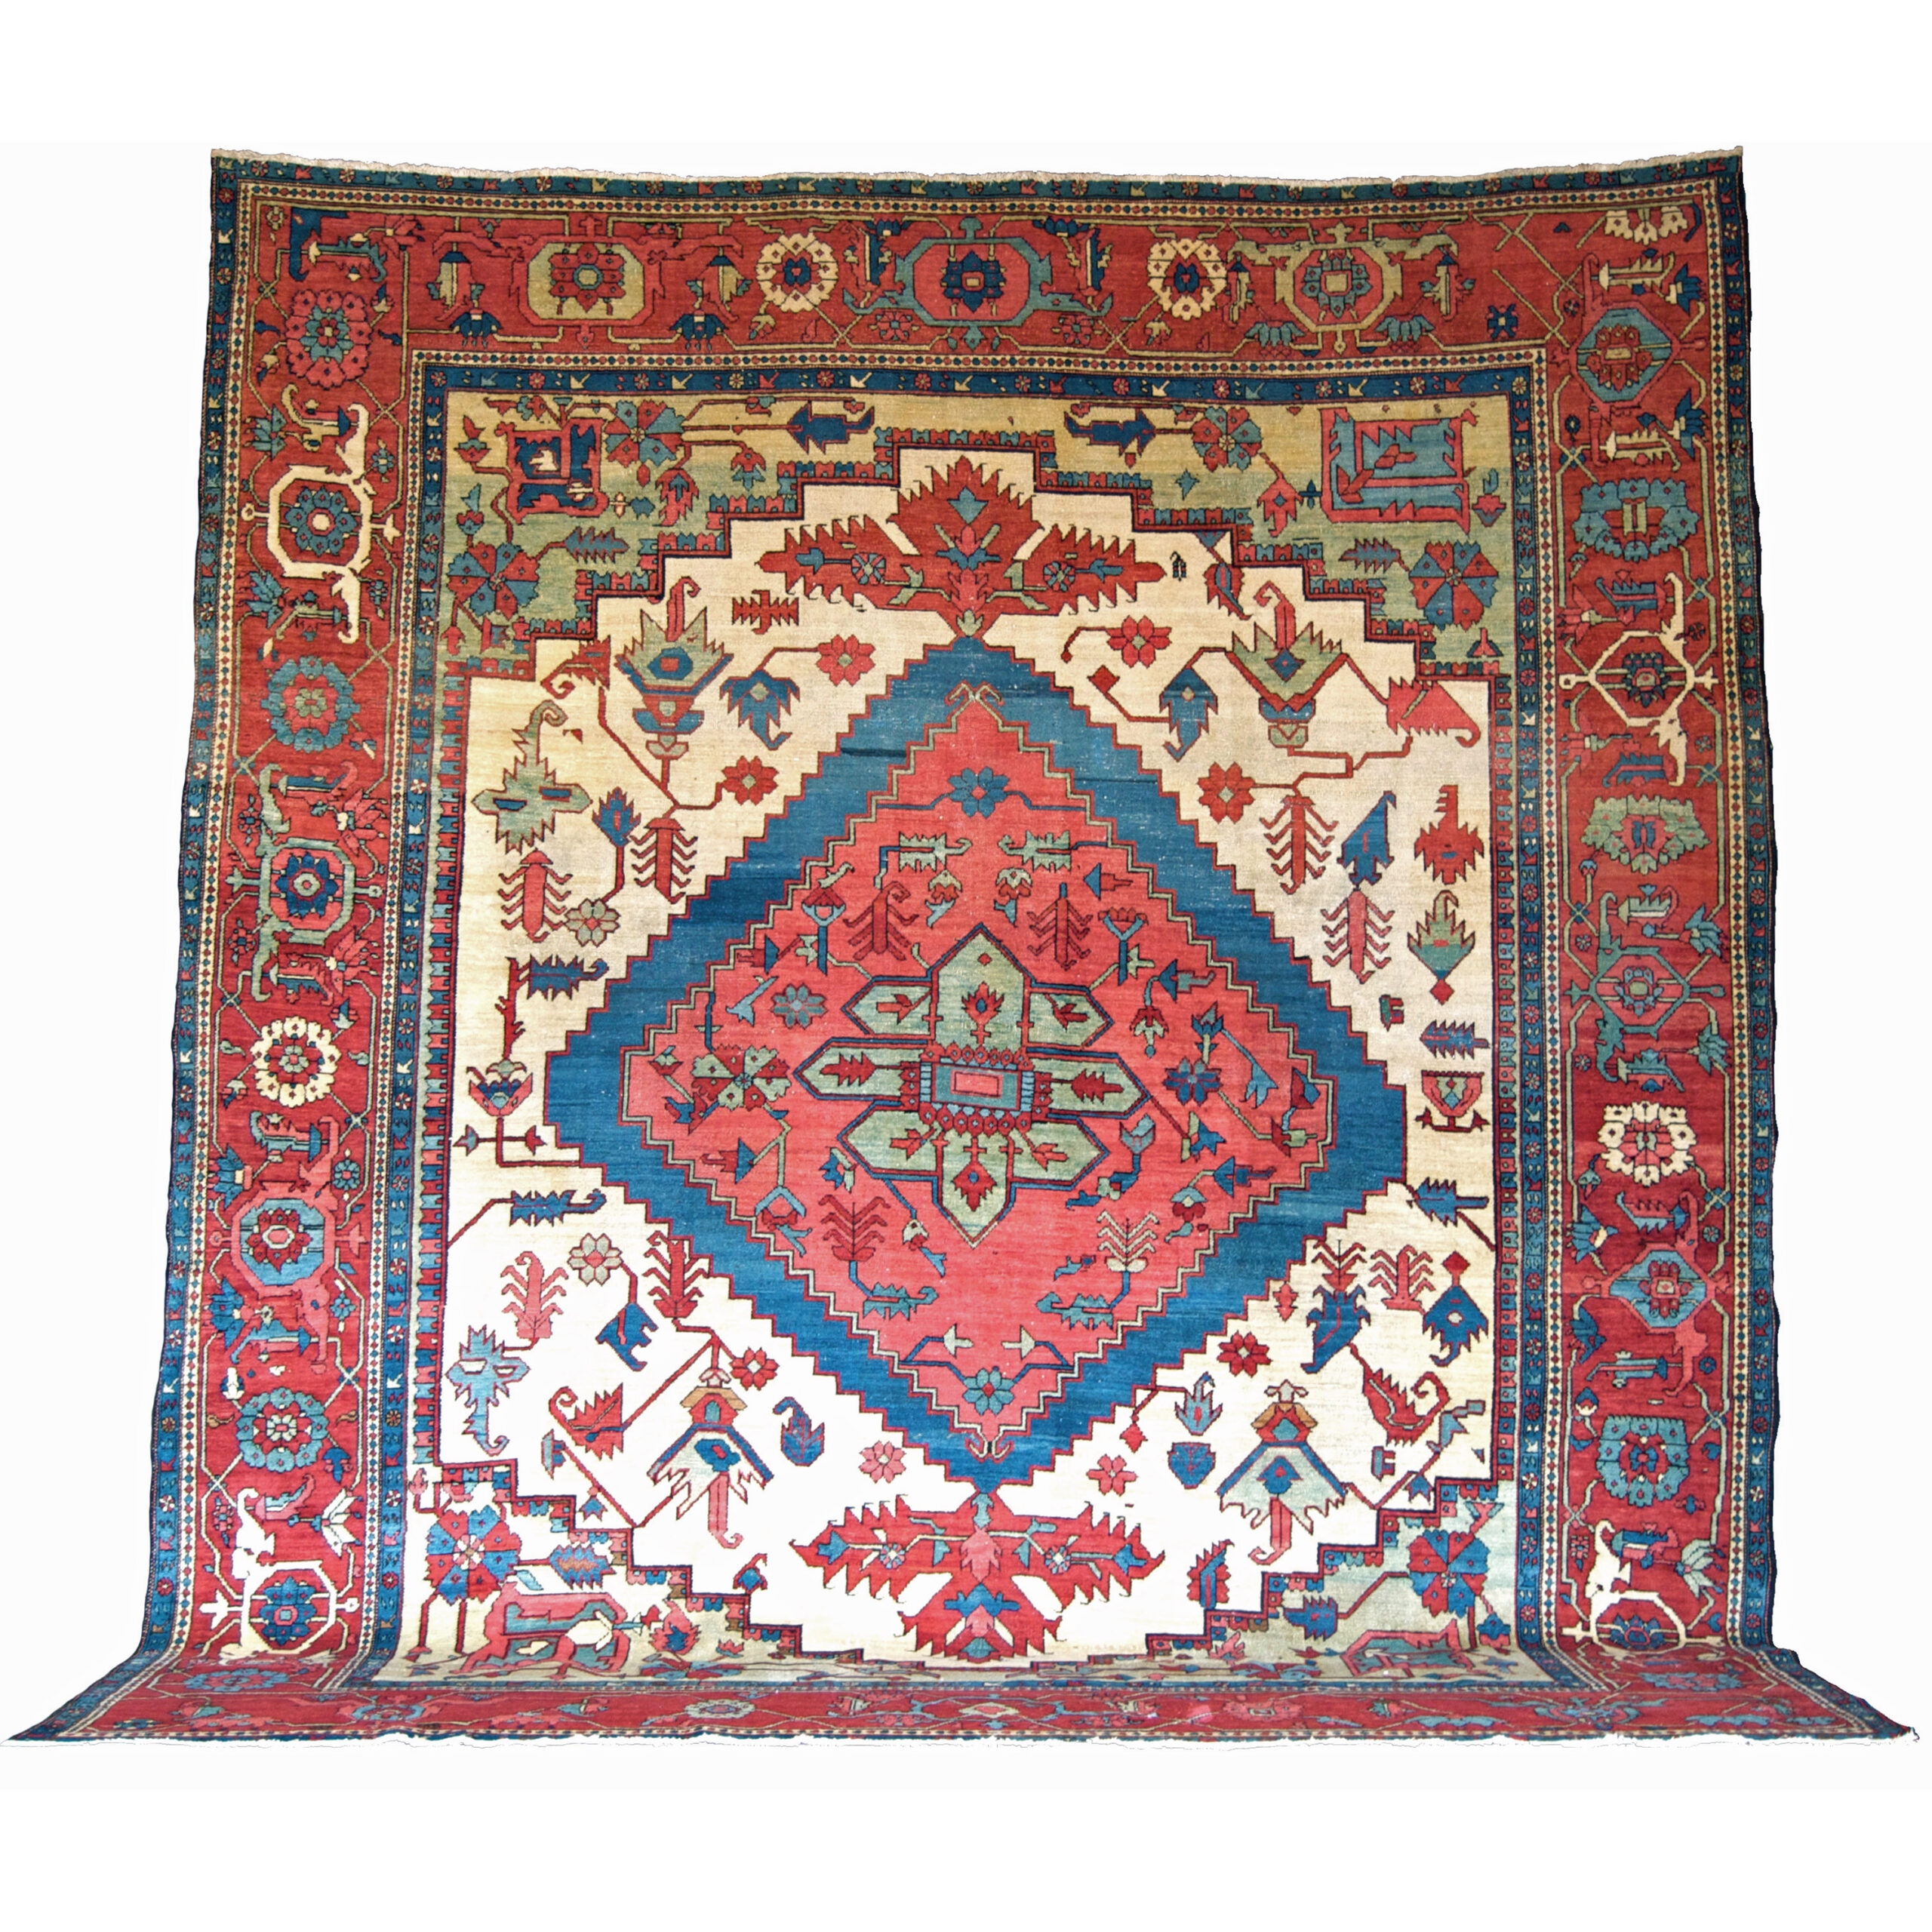 Douglas Stock Gallery Antique Oriental Rug Research Archives are an excellent source of information for people interested in learning more about antique Persia, Caucasian and other types of antique Oriental rugs, antique Heriz Serapi carpet with a denim and coral medallion on an ivory field that is framed by grass green corner spandrels and a brick red Turtle border, Douglas Stock Gallery, antique Persian carpets Boston,MA area, antique Oriental rugs New England, antique rugs New York